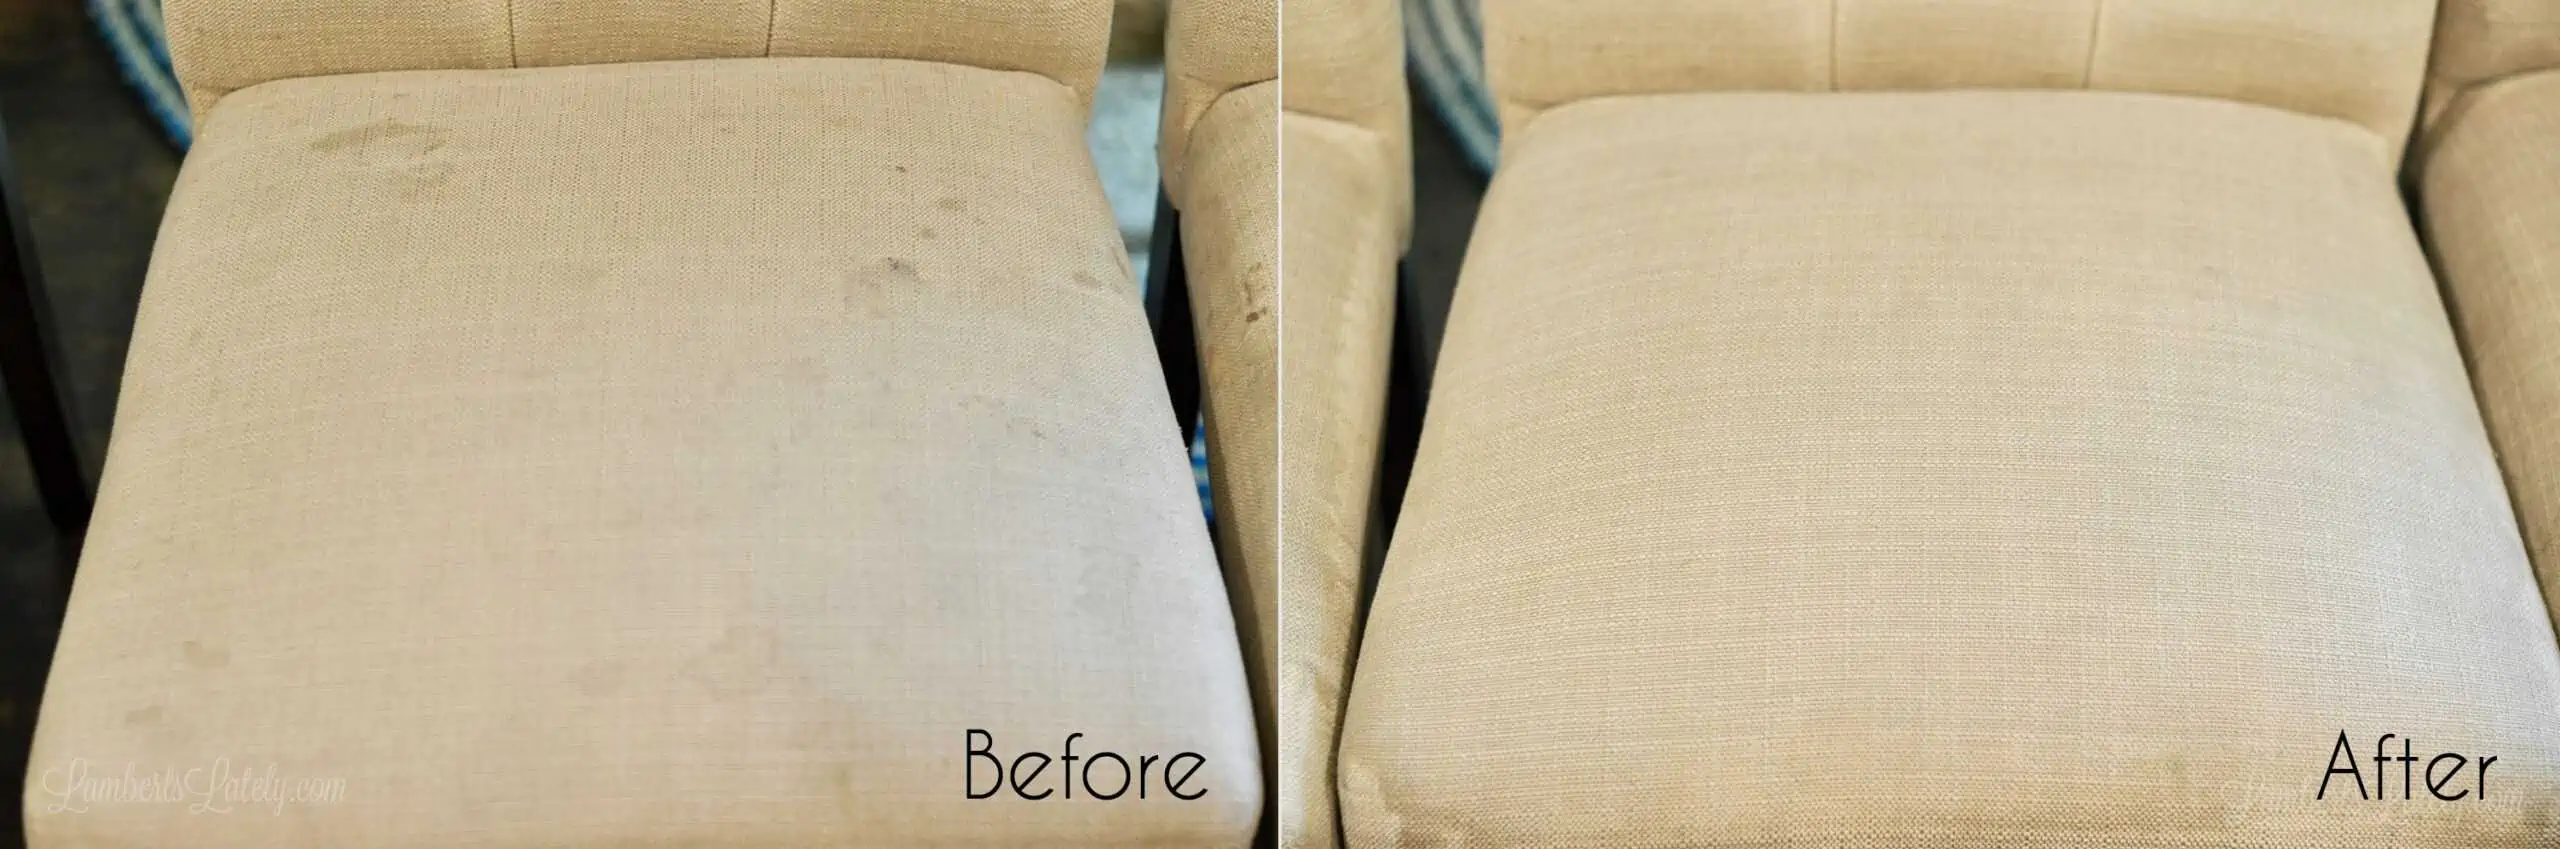 before and after of cleaning upholstered chairs.